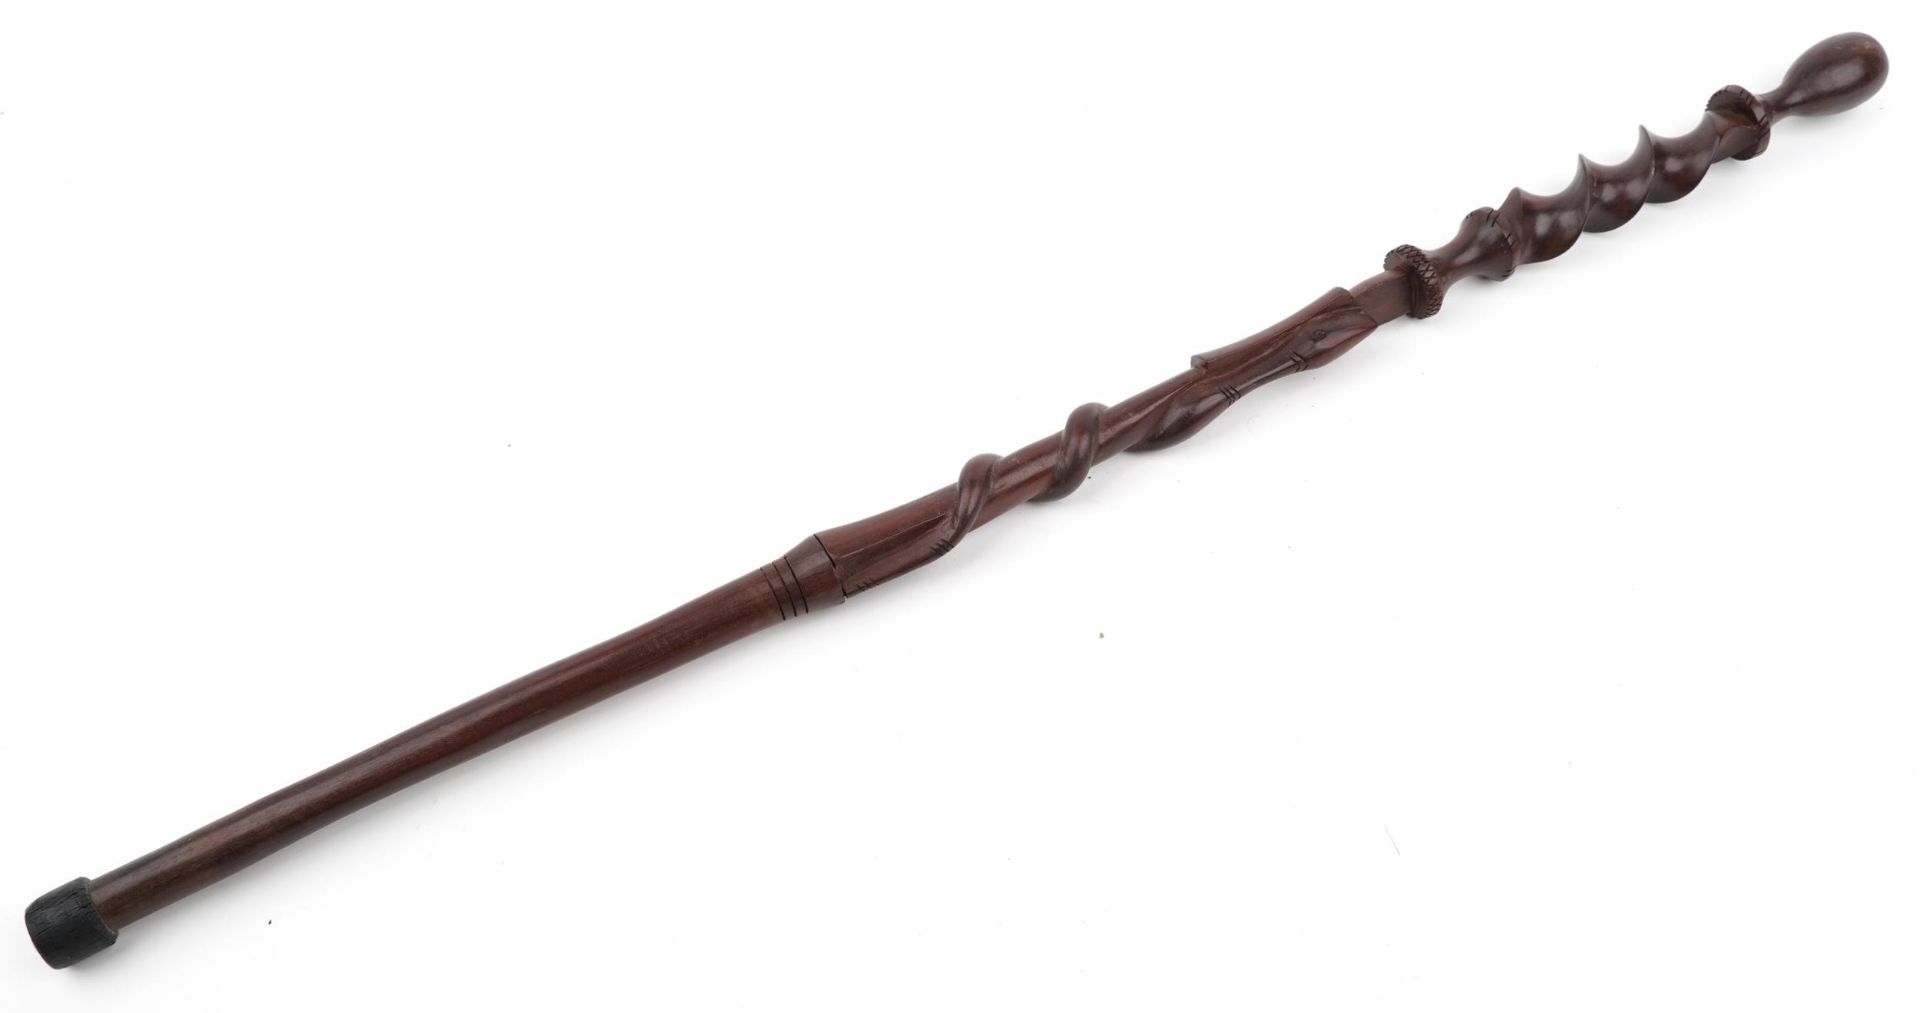 Tribal interest hardwood walking stick carved with a serpent, 93cm in length - Image 2 of 3